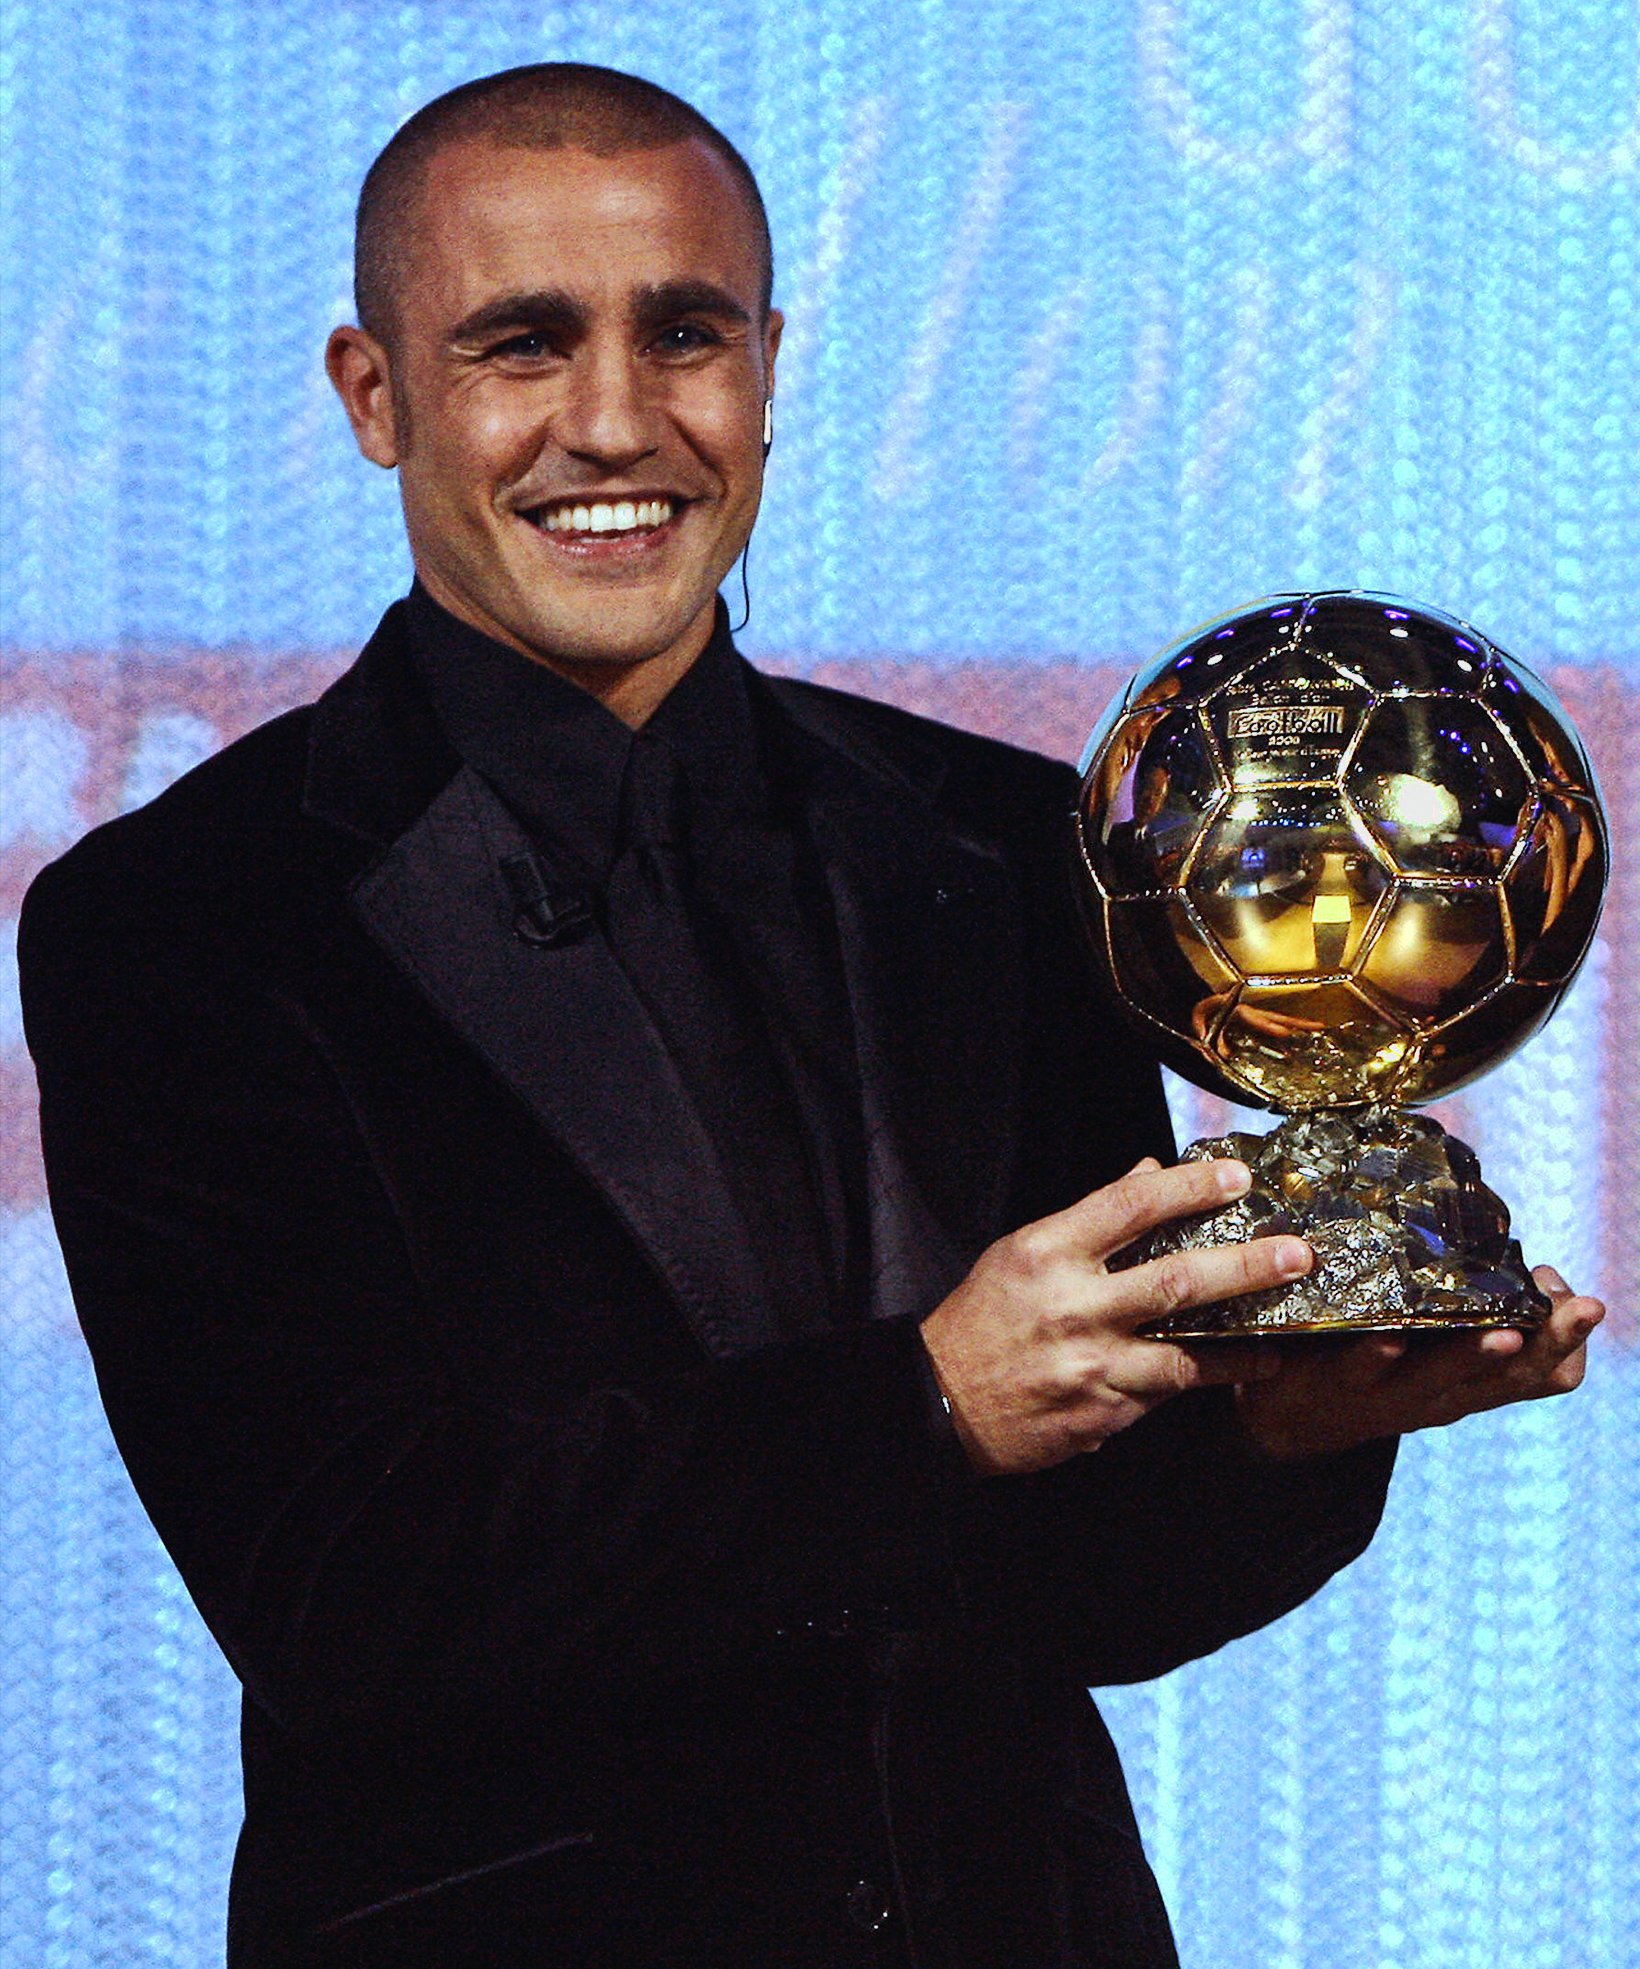 GOAL on Twitter: Fabio Cannavaro won the Ballon d'Or on this day in 2006   He's the last defender to win the award. https://t.co/kNUyWJJ6hh /  Twitter